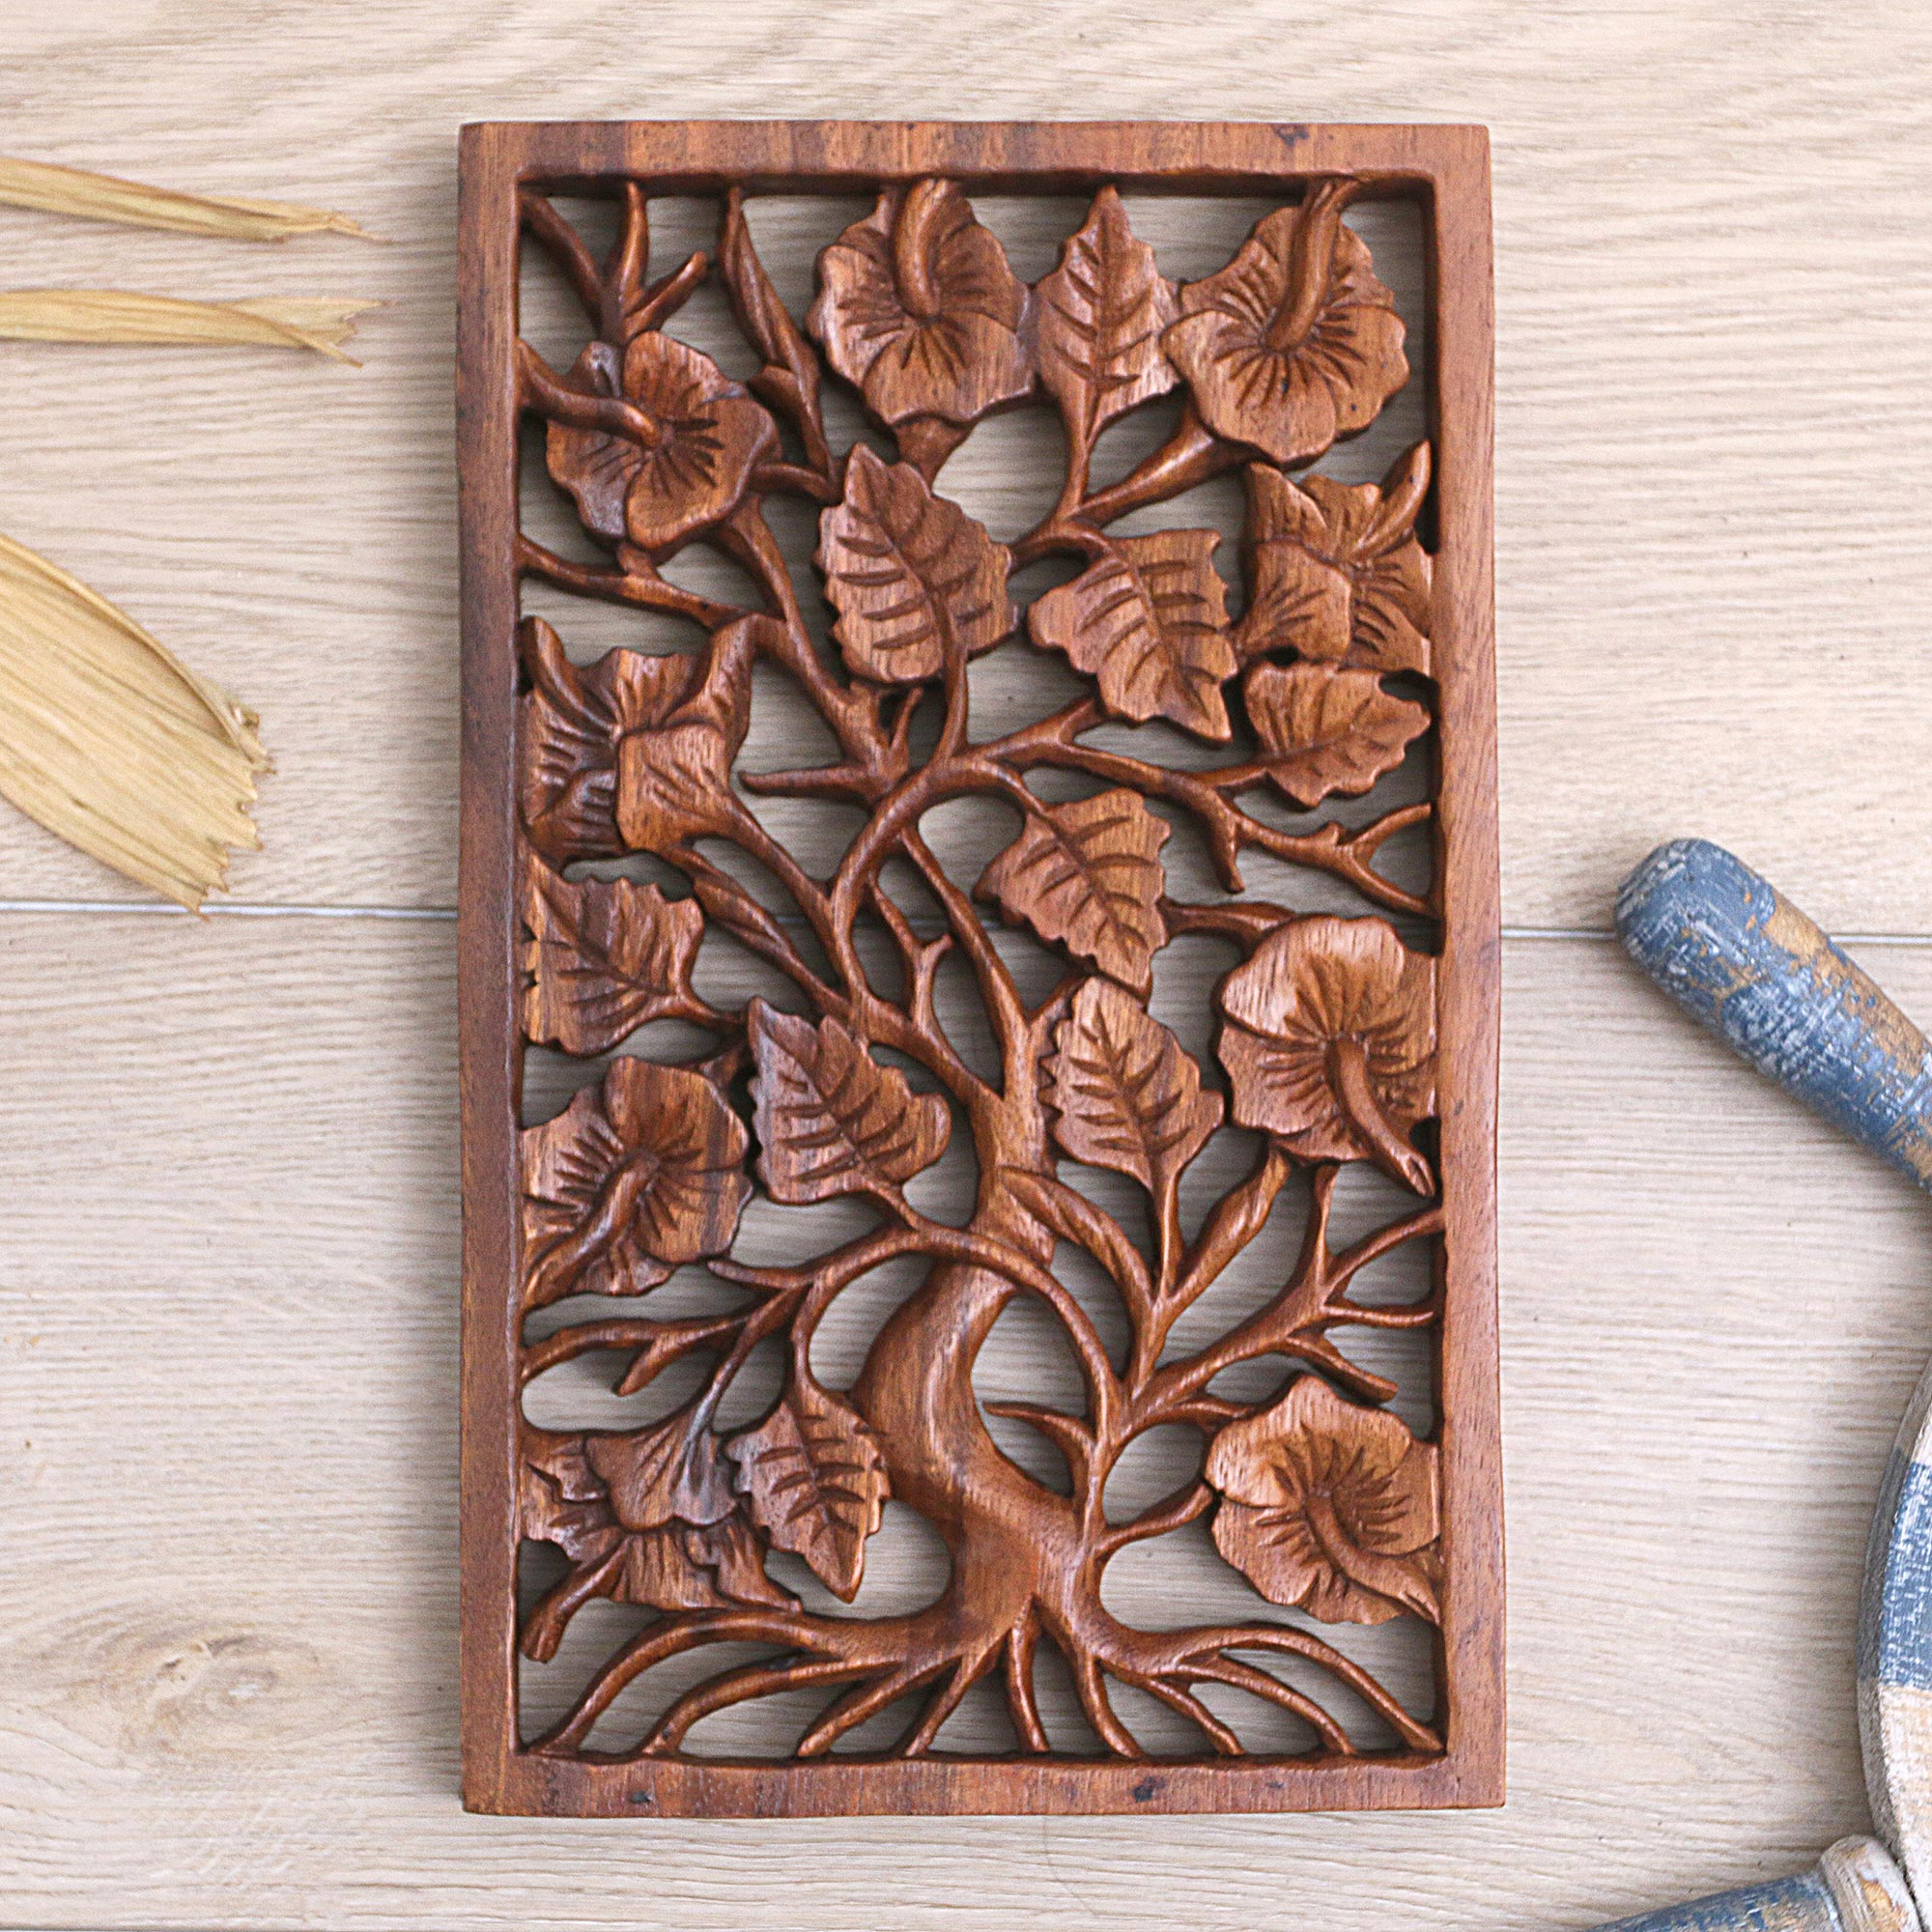 Hand-Carved Suar Wood Relief Panel with Leafy Design Spring Tree NOVICA  United Kingdom